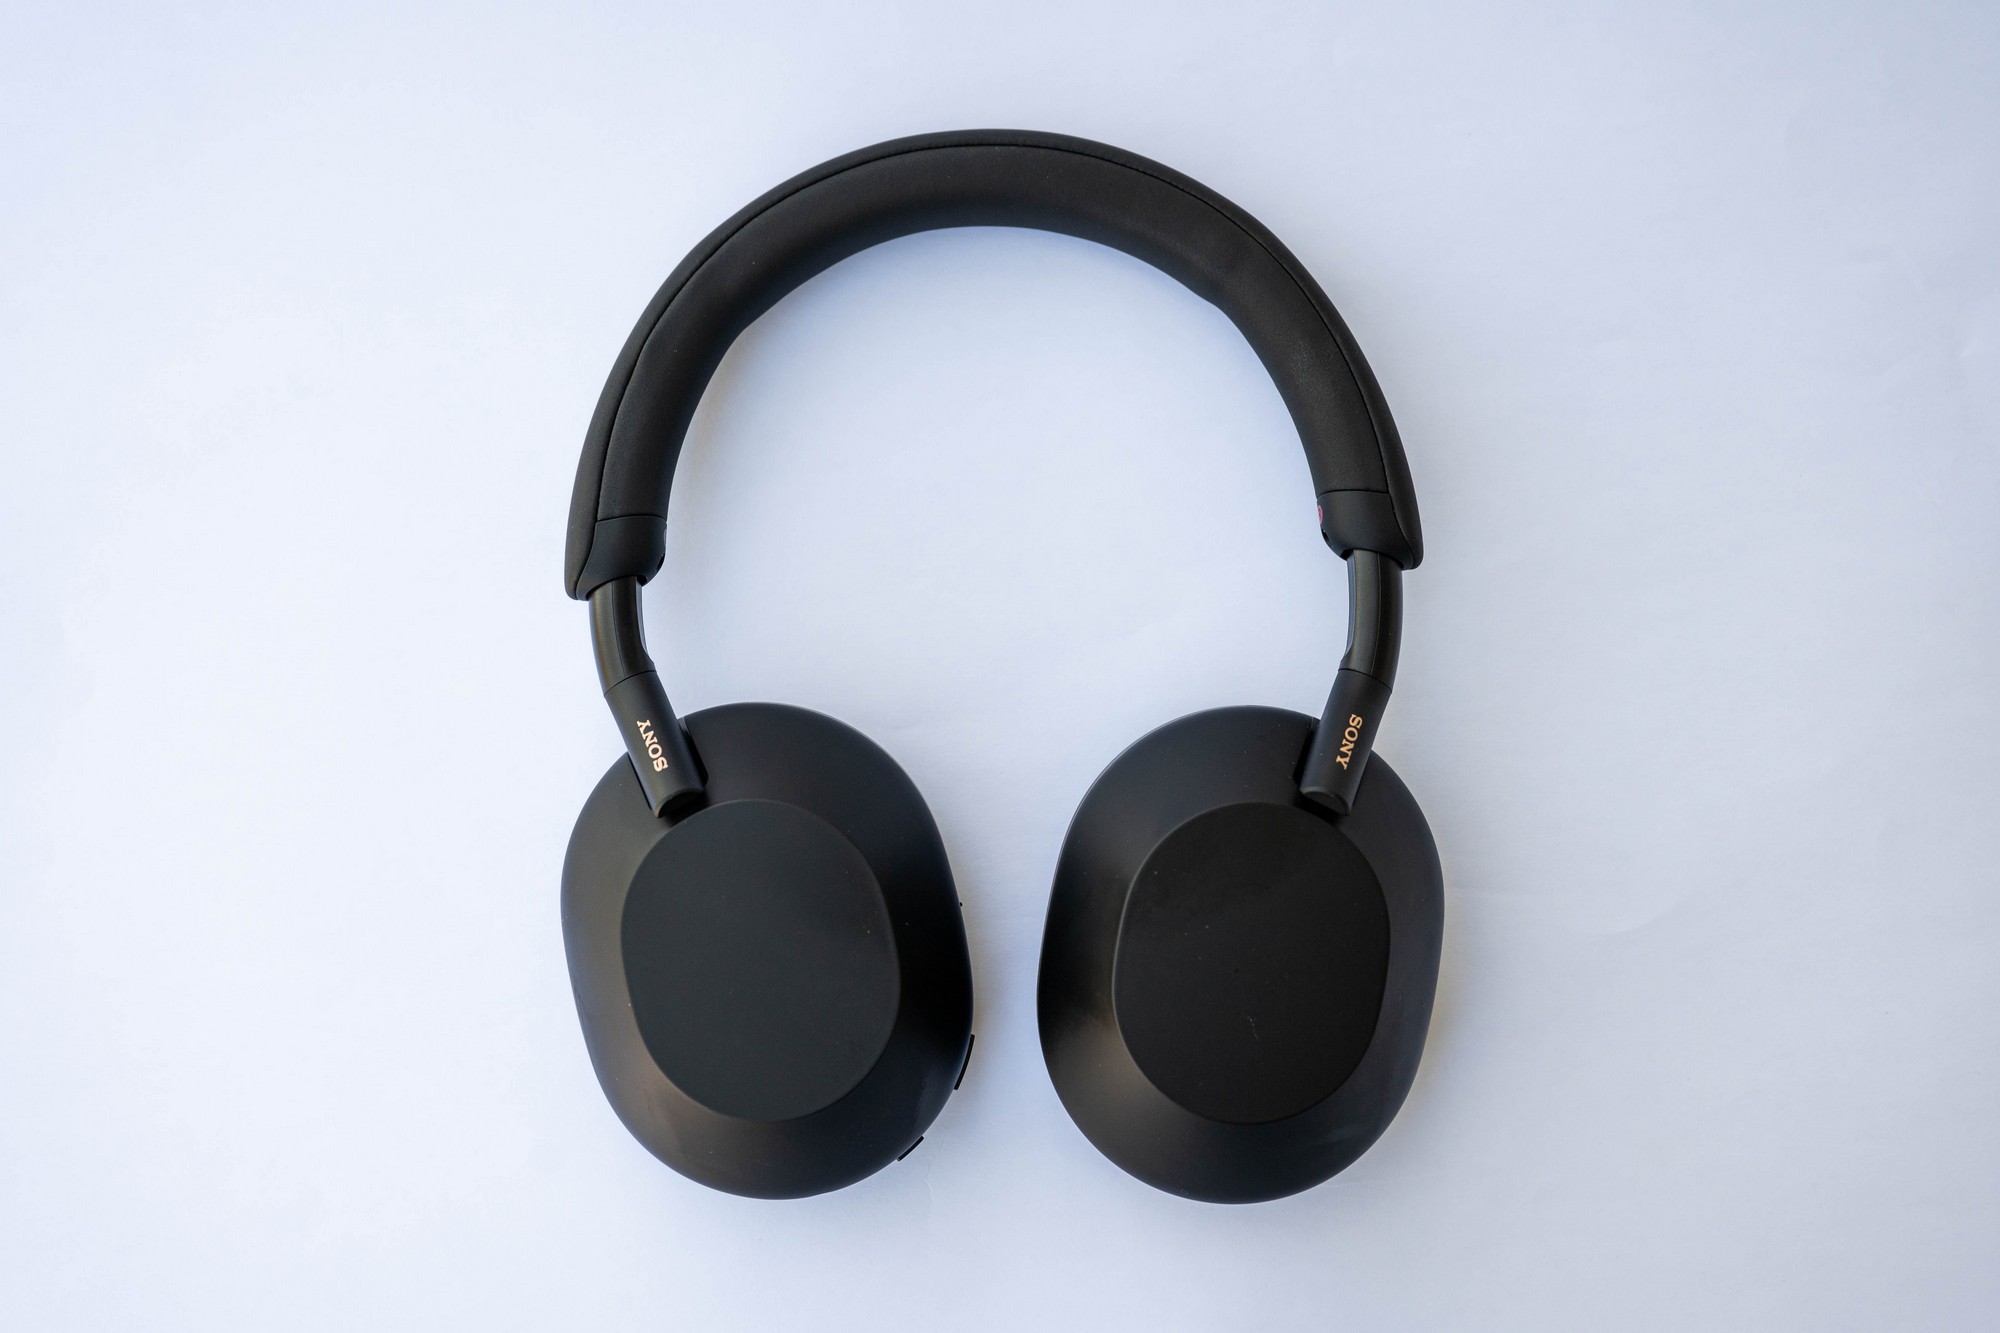 Best noise-cancelling headphones of 2022: Reviews and buying advice